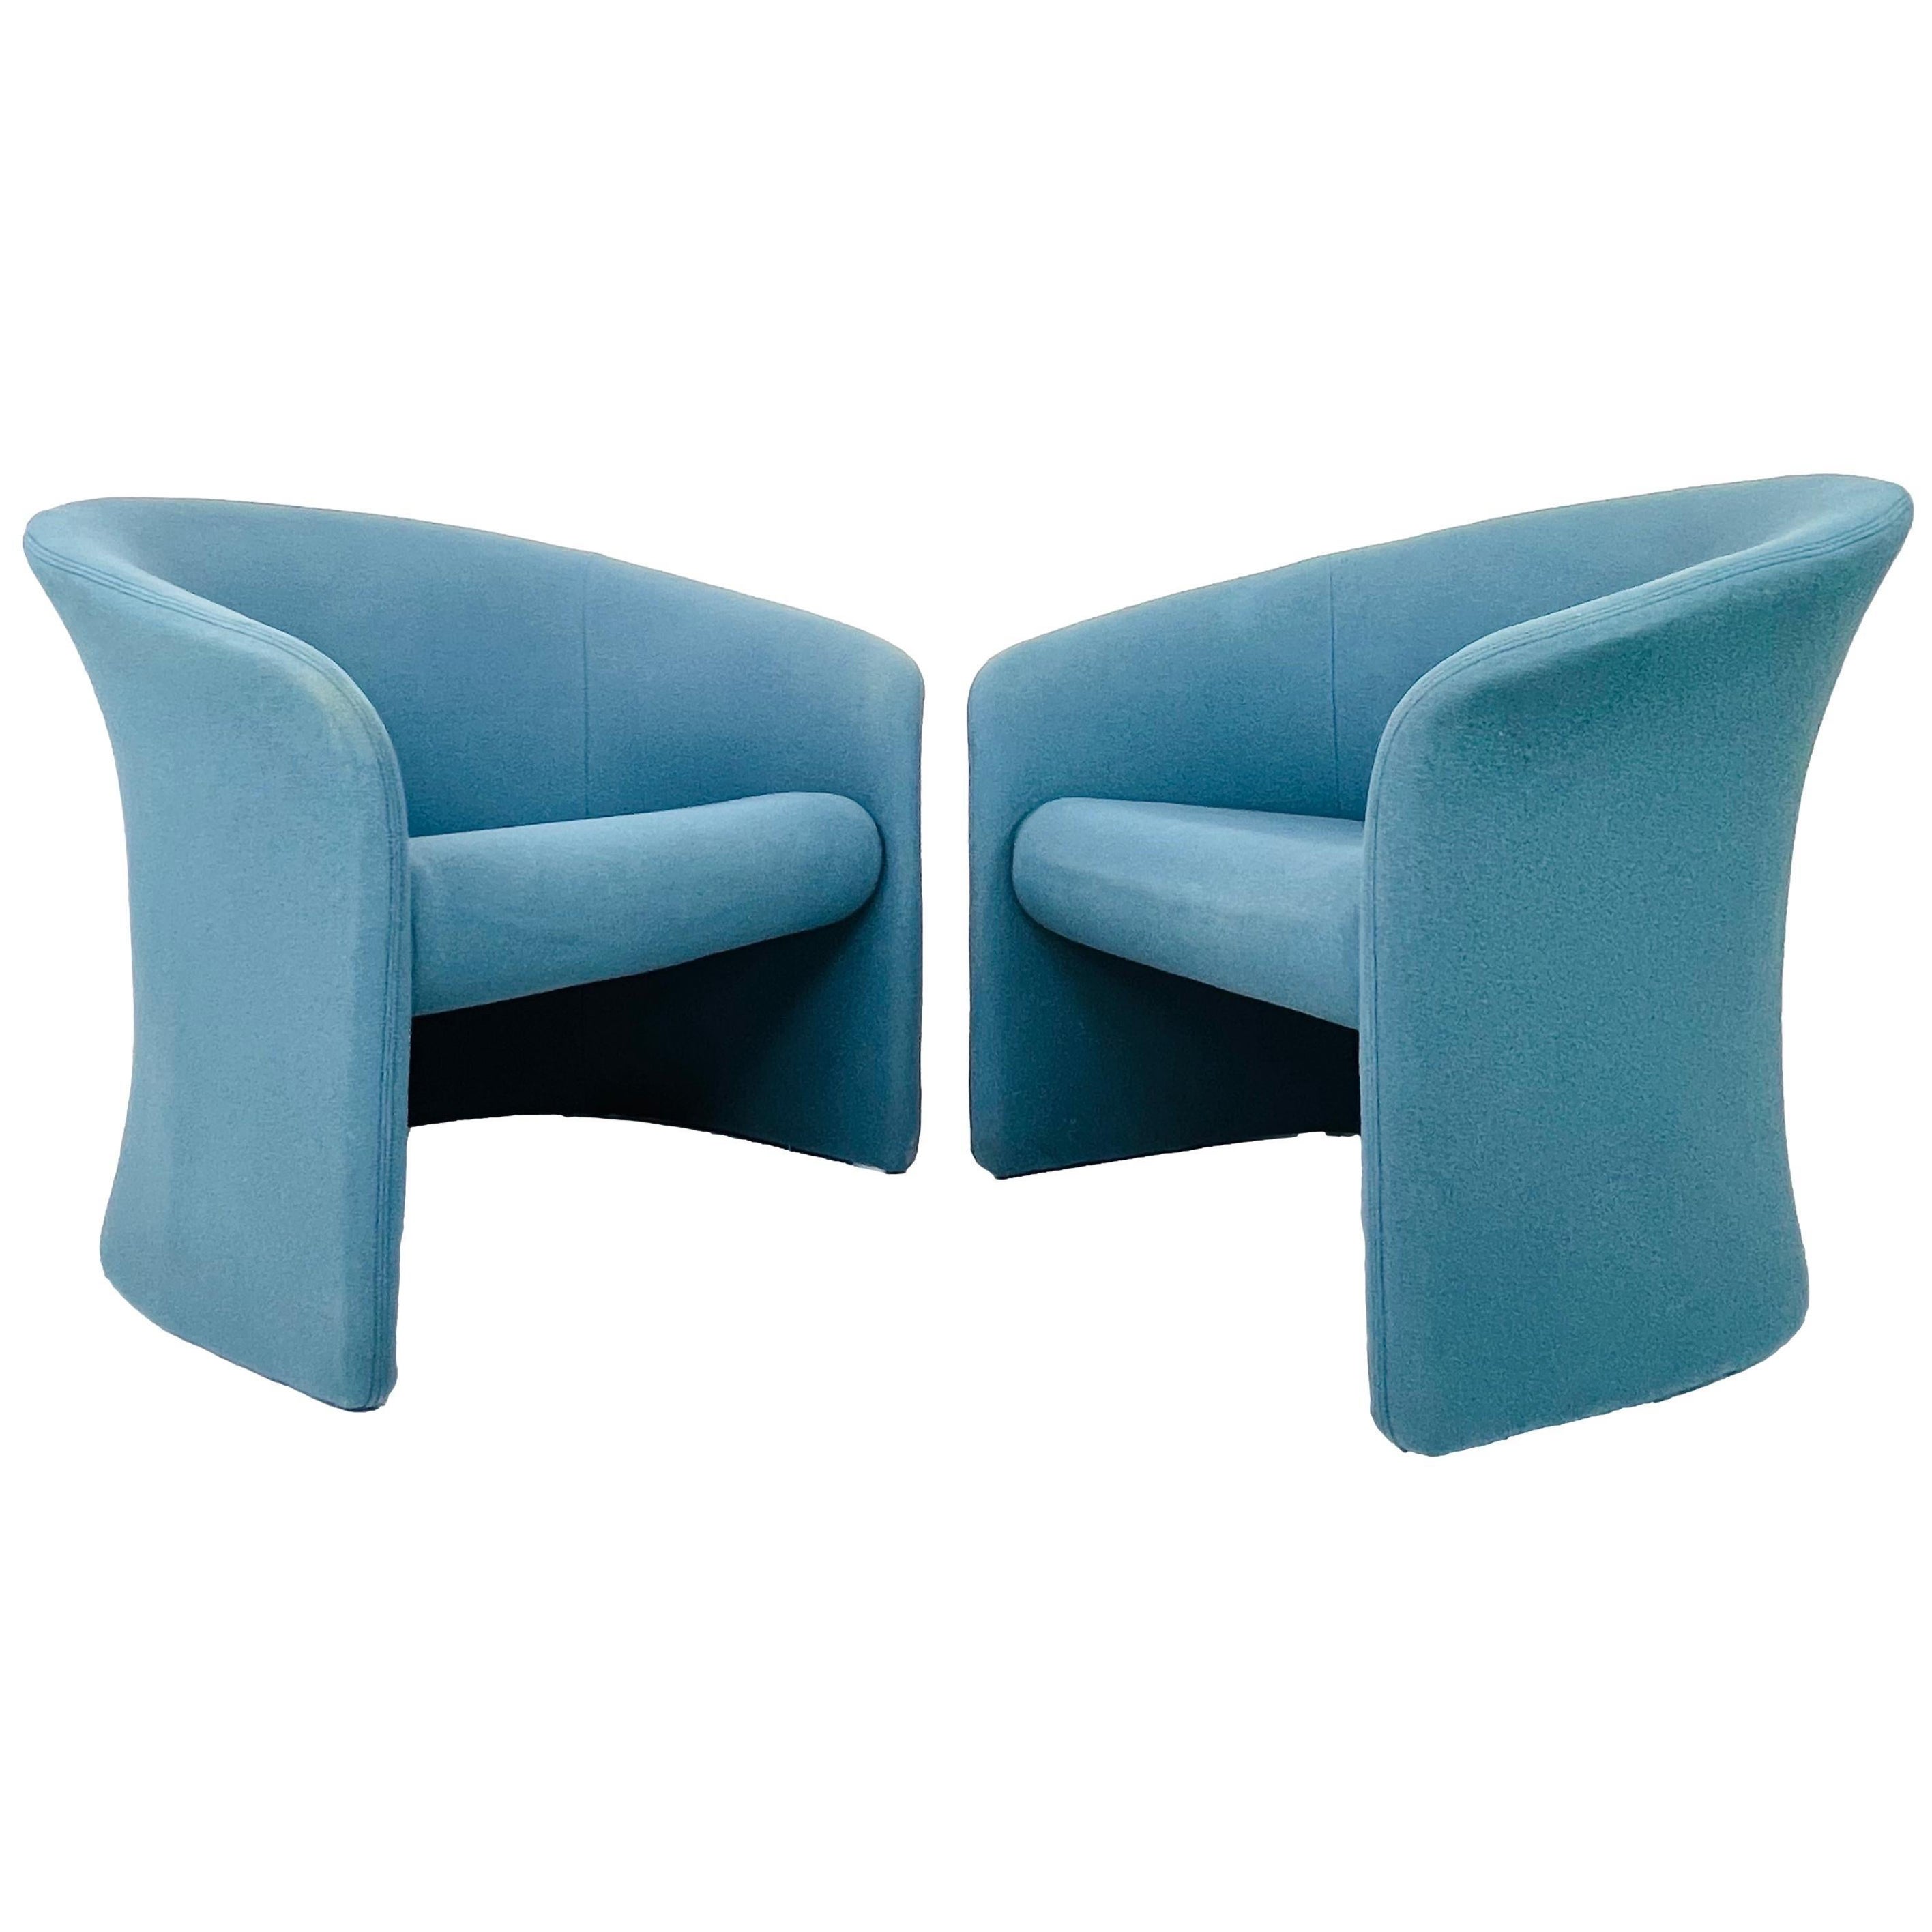 Pair of Postmodern Tub Chairs by Massimo Vignelli For Sale